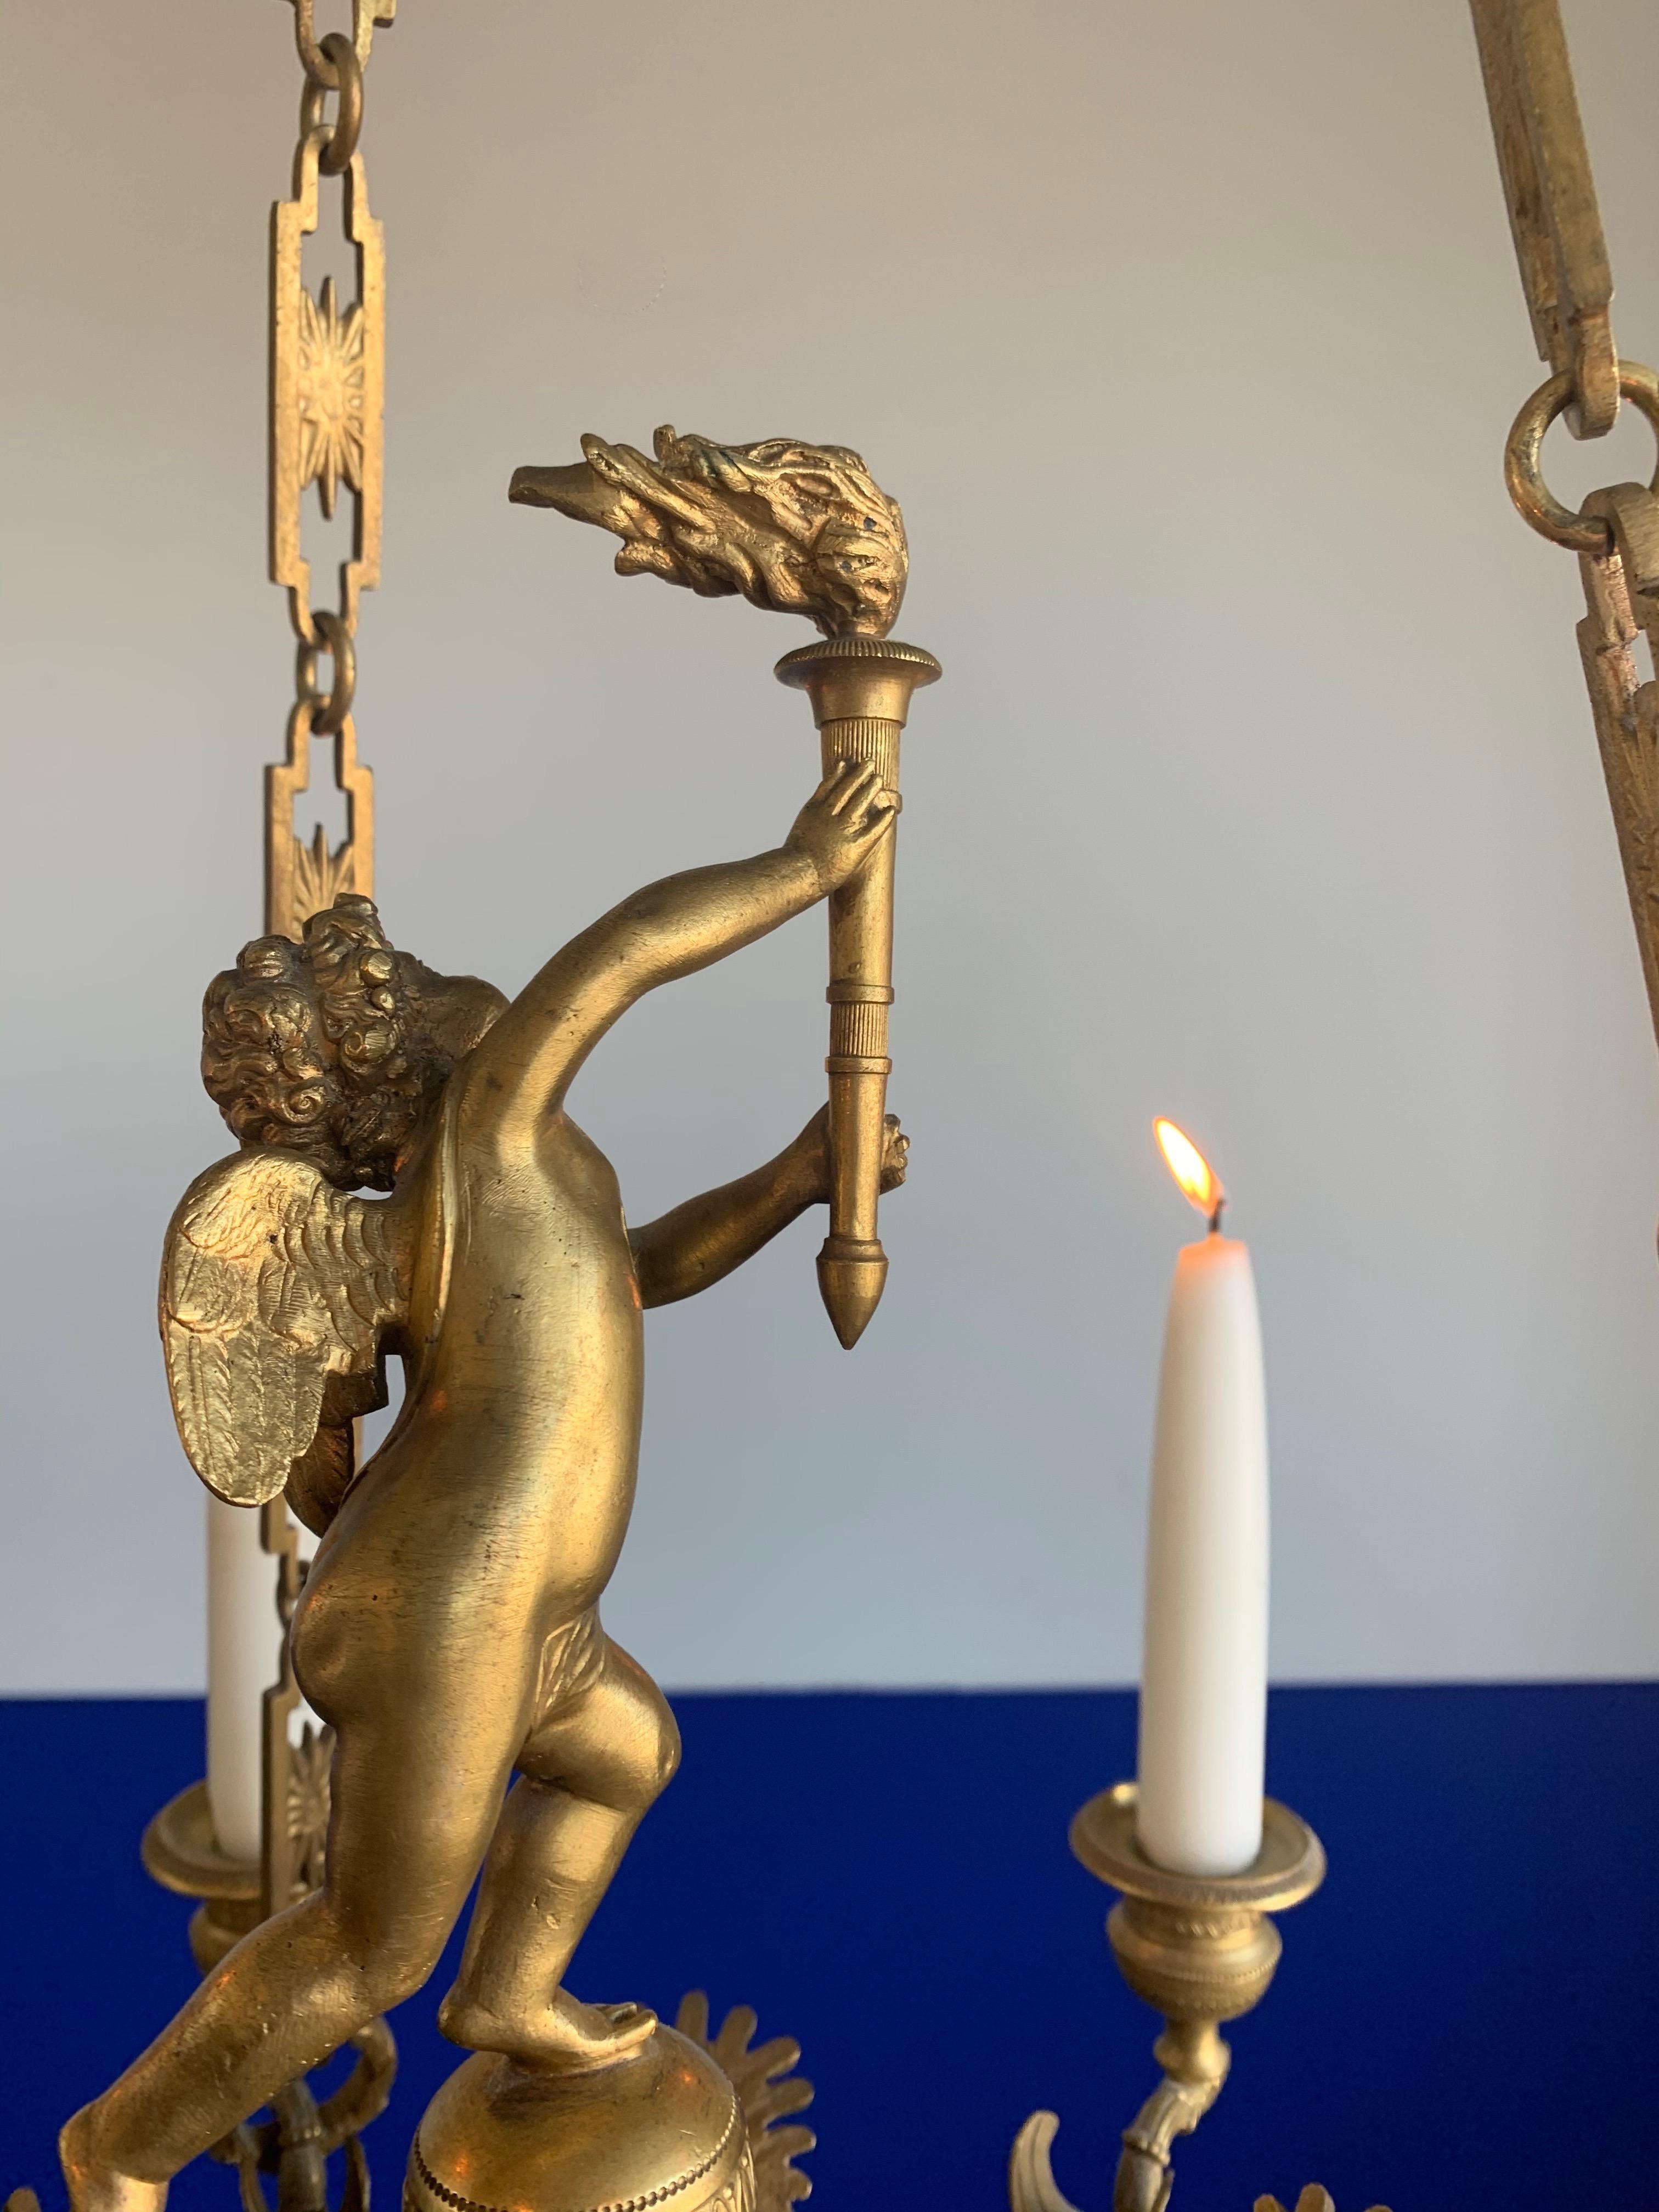 Mid-19th Century Antique French Empire Gilt Bronze Candle Pendant Light or Chandelier with Cherub For Sale